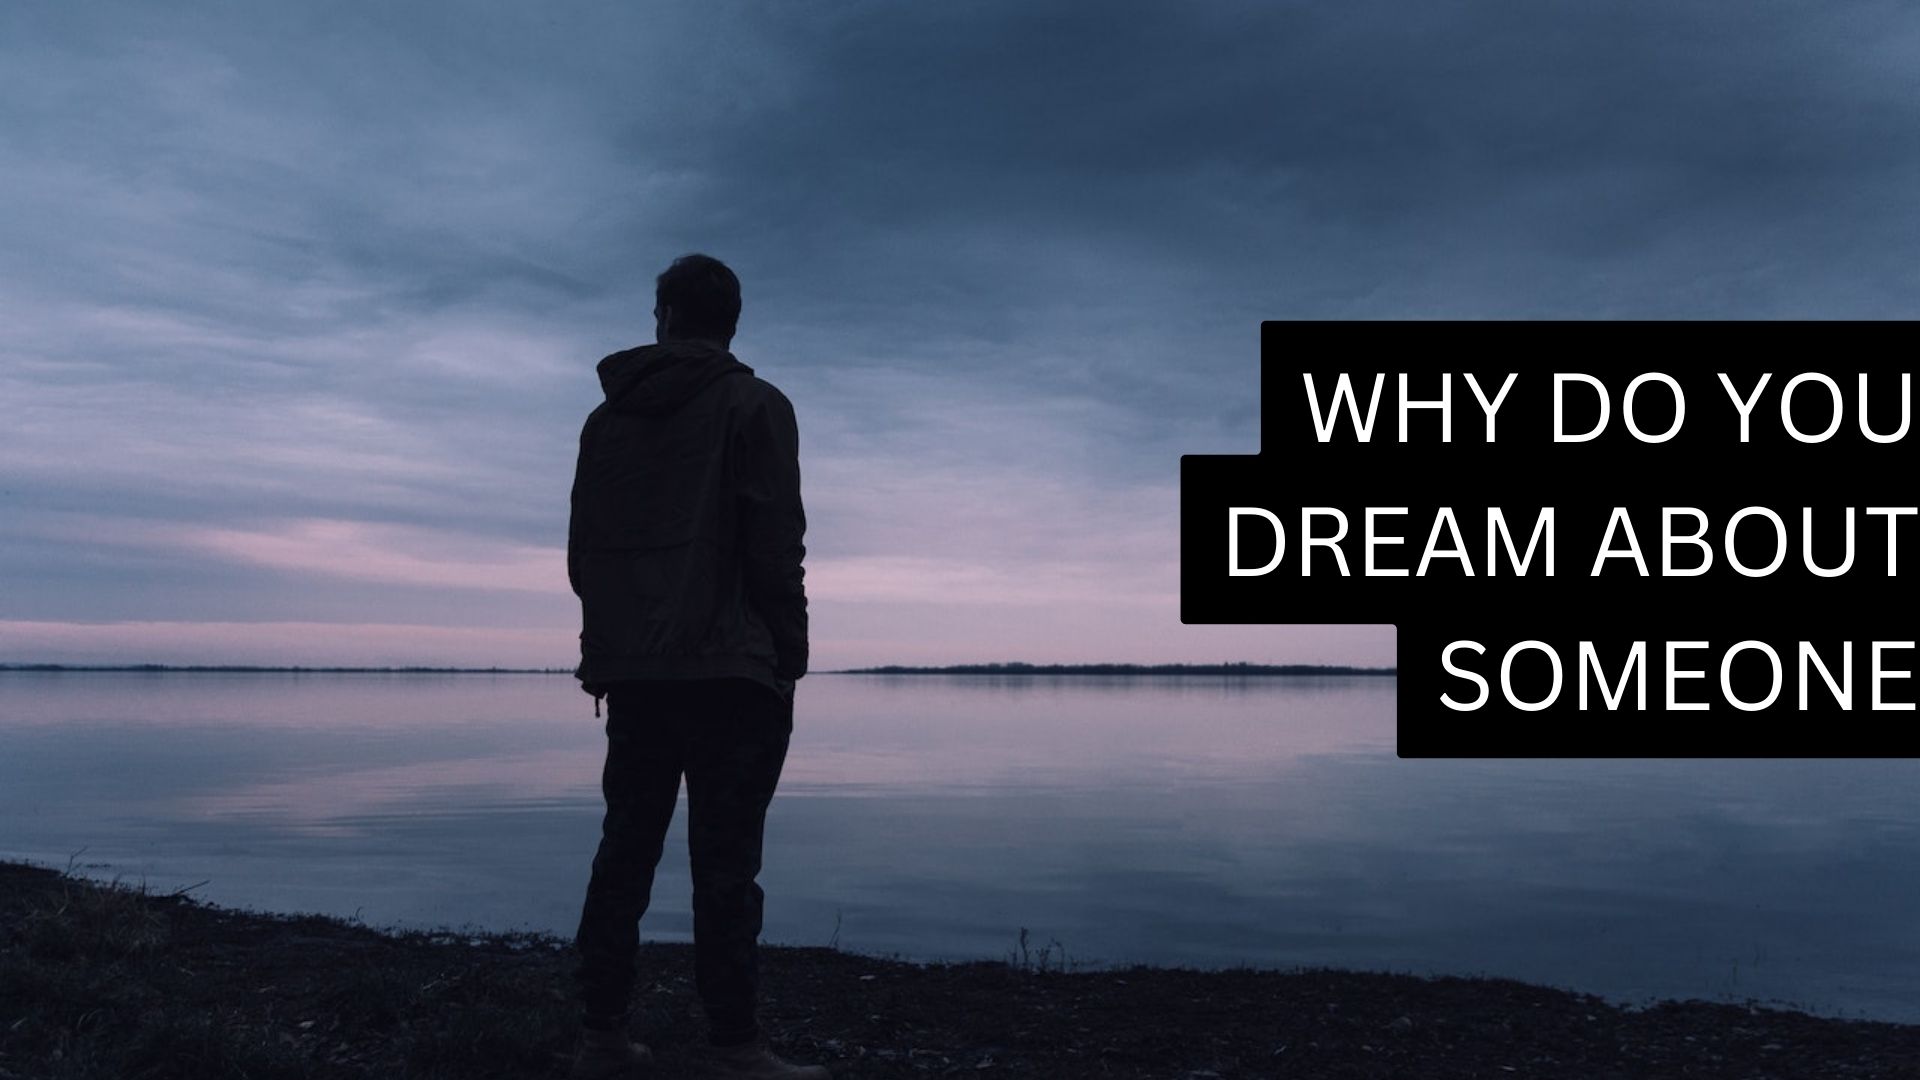 Why Do You Dream About Someone And What Does It Mean?